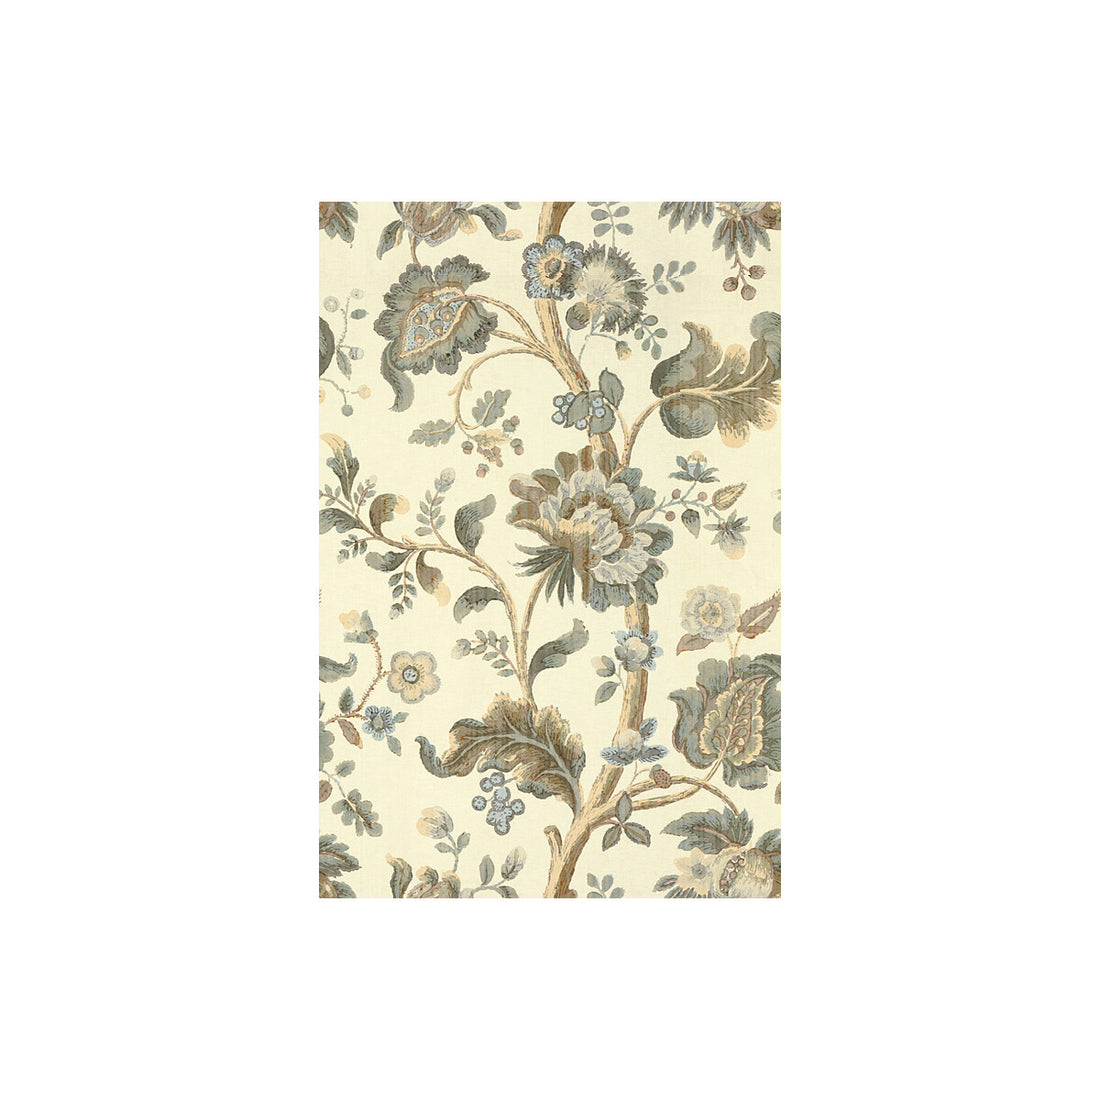 Treyes Print fabric in sage color - pattern 2010151.3.0 - by Lee Jofa in the Heritage collection